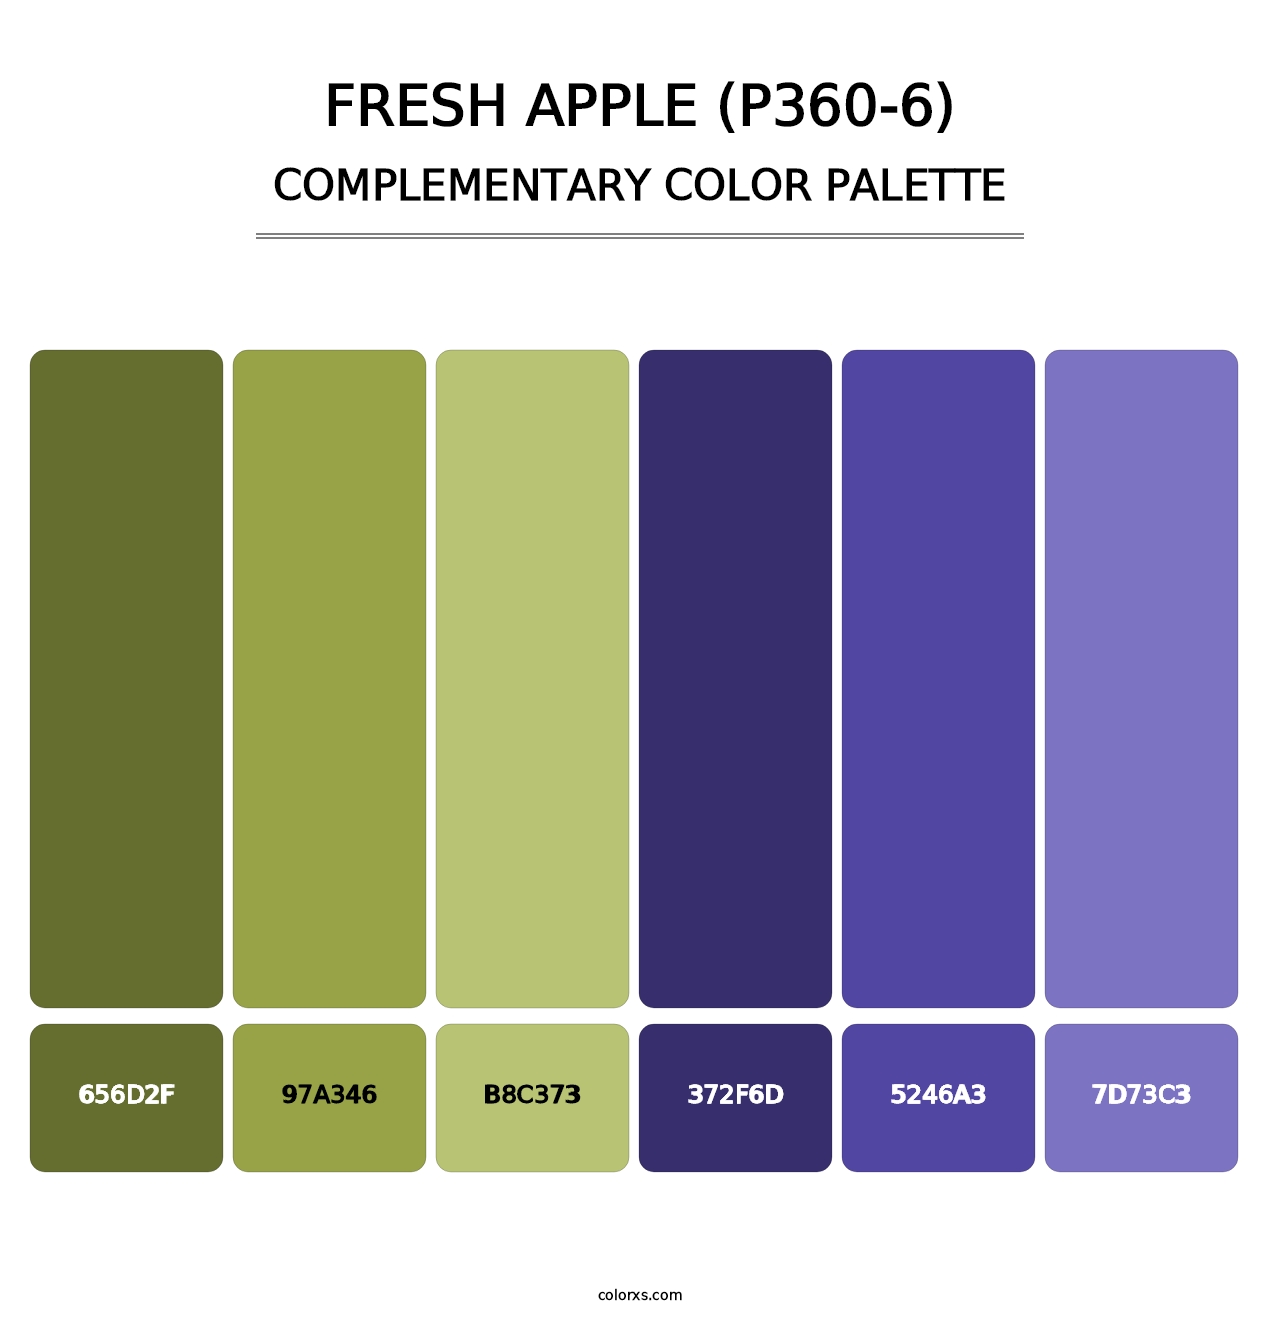 Fresh Apple (P360-6) - Complementary Color Palette